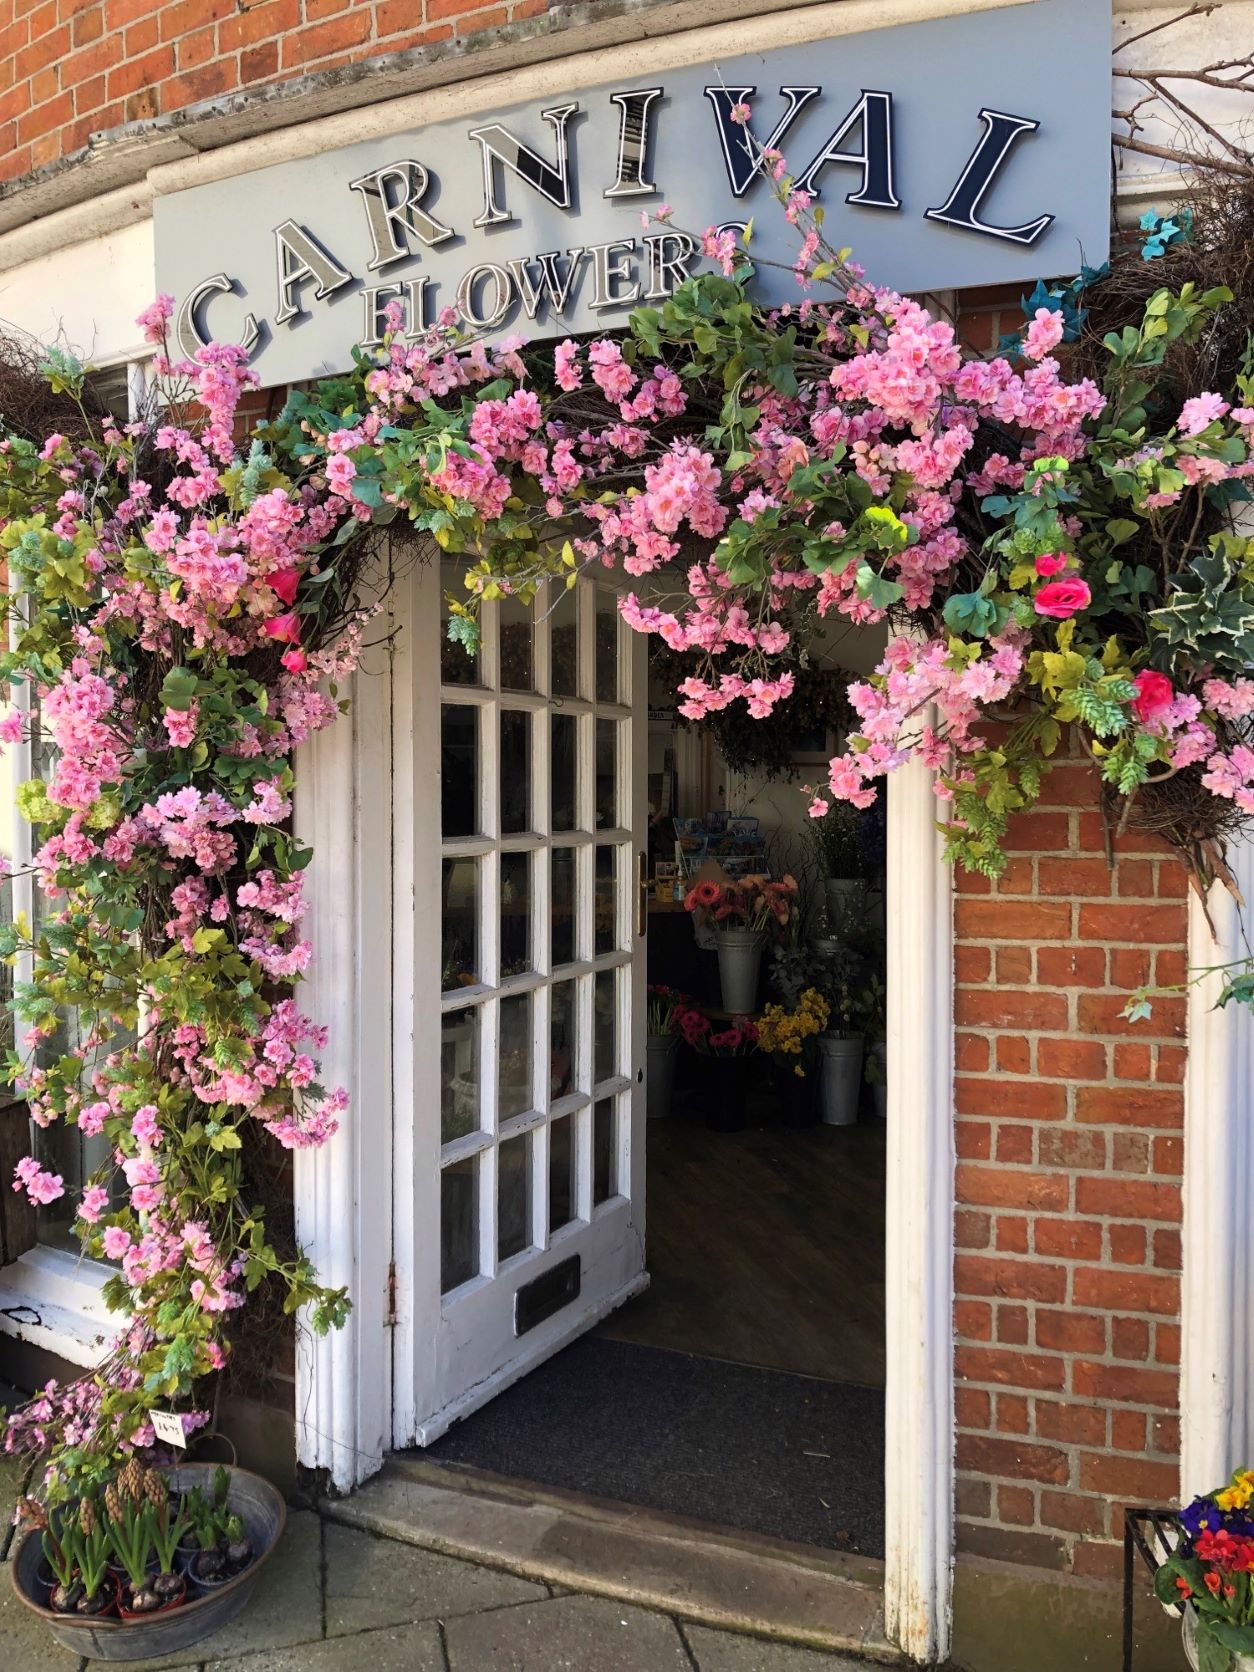 Florist doorway surrounded with pink flowers